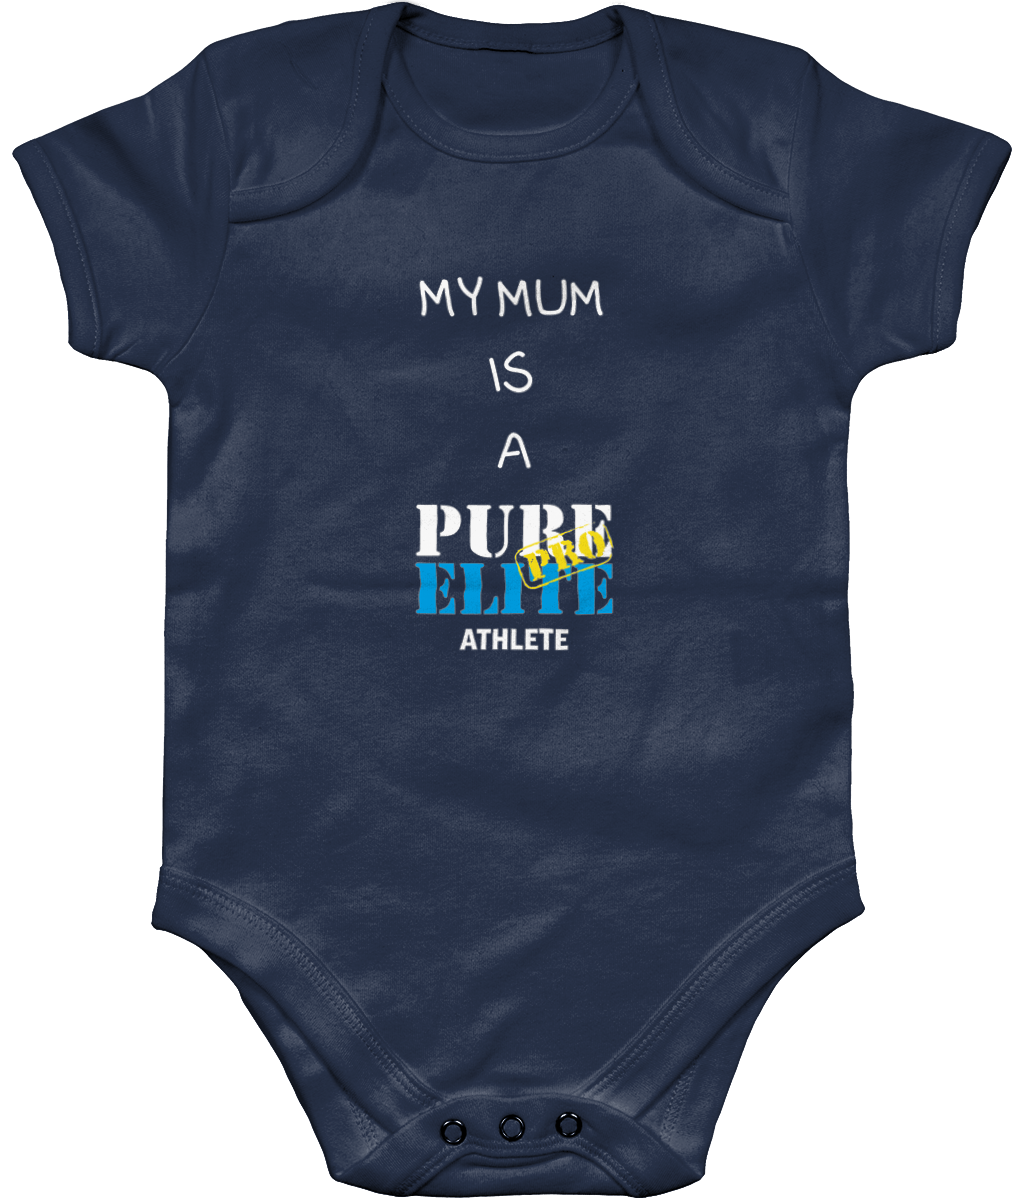 Baby Suit - My mum is a Pure Elite Pro